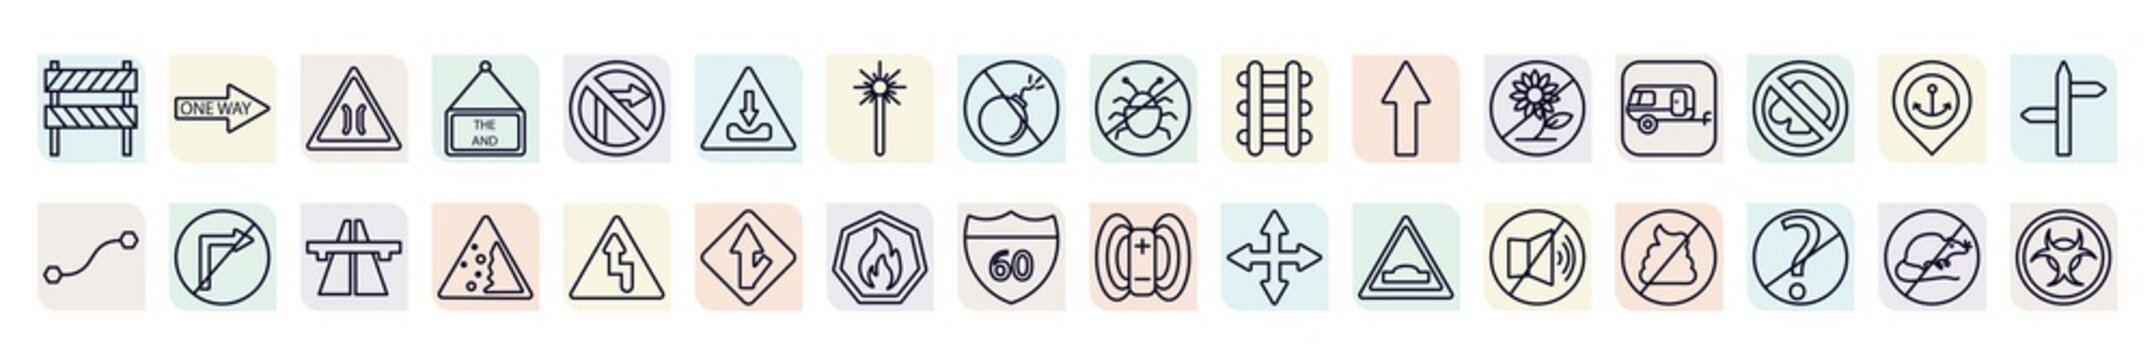 set of traffic signs icons in outline style. thin line icons such as barrier, bridge road, pothole, railway, caravan, no turn, falling rocks, fire, no sound icon.